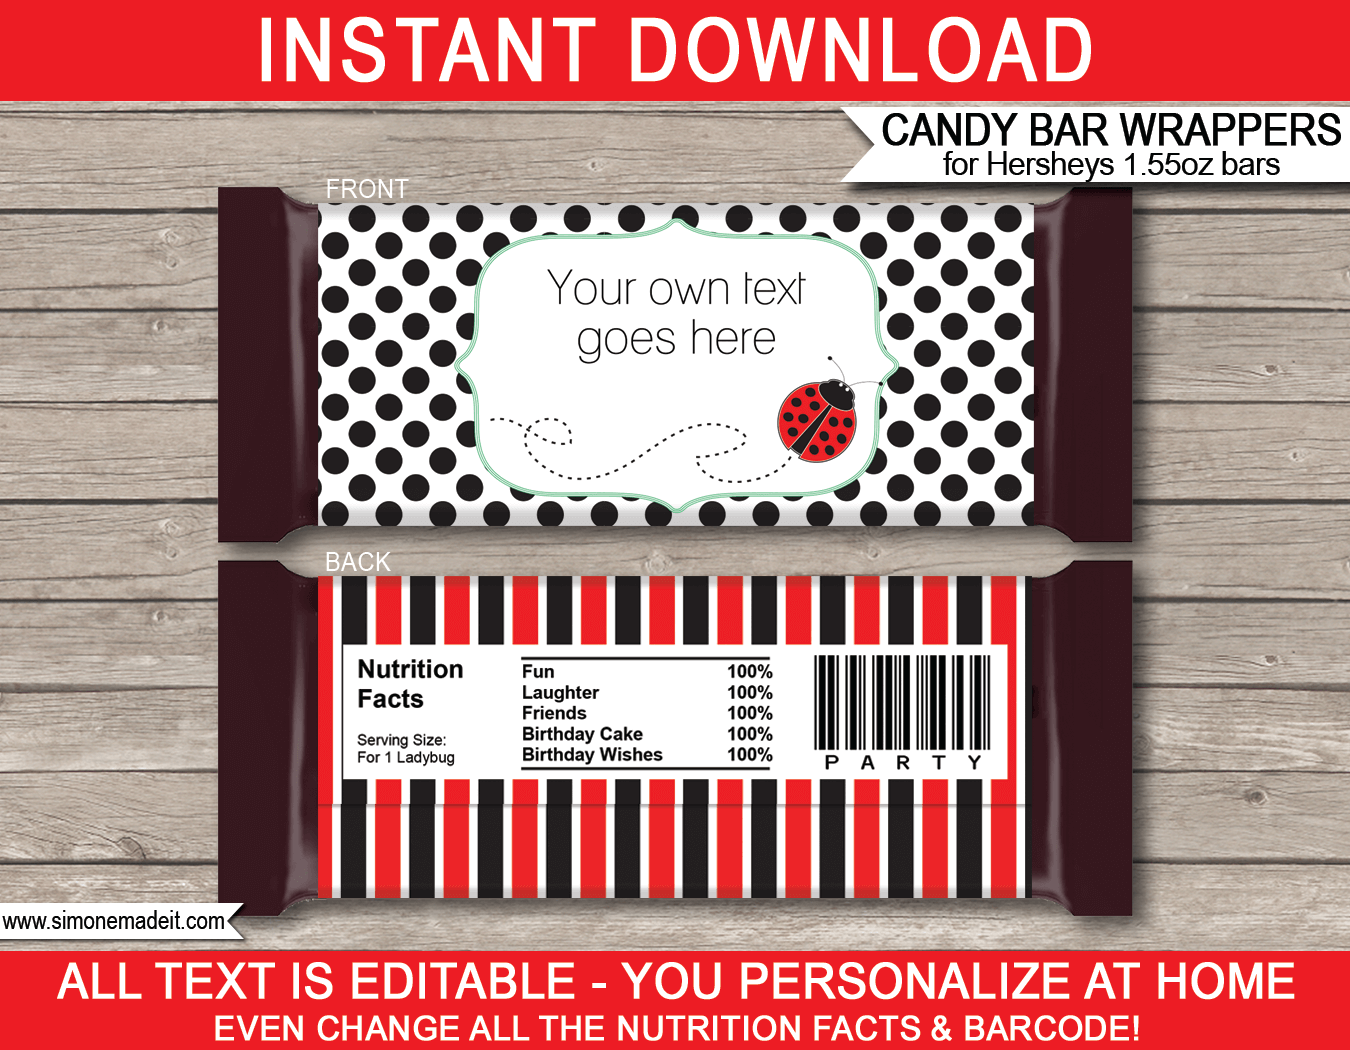 Ladybug Hershey Candy Bar Wrappers | Ladybird | Birthday Party Favors | Personalized Candy Bars | Editable Template | INSTANT DOWNLOAD $3.00 via simonemadeit.com